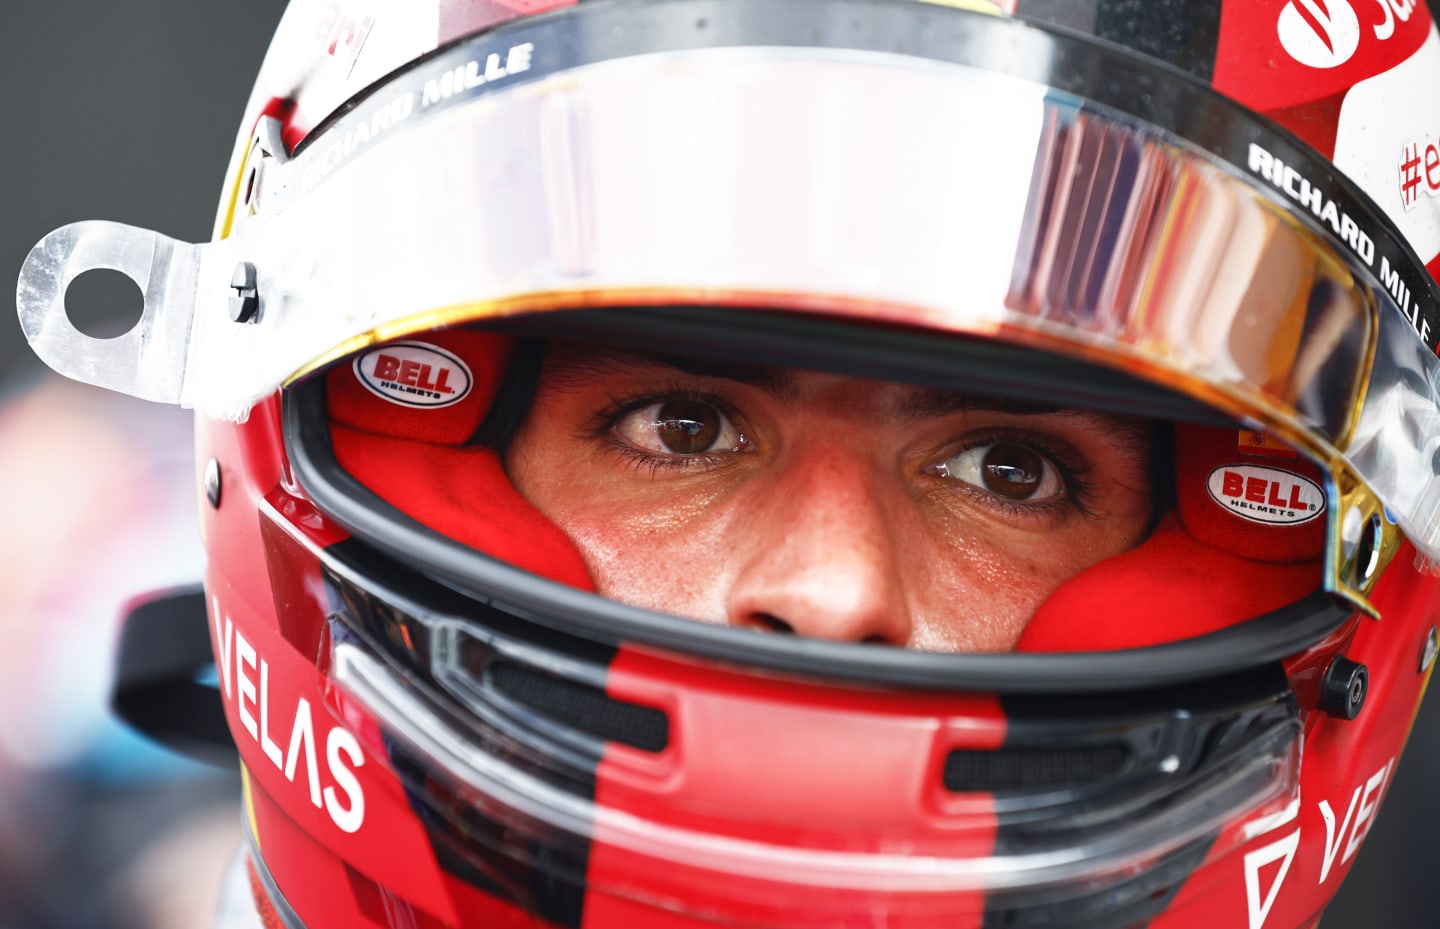 MIAMI, FLORIDA - MAY 08: Third placed Carlos Sainz of Spain and Ferrari looks on in parc ferme during the F1 Grand Prix of Miami at the Miami International Autodrome on May 08, 2022 in Miami, Florida. (Photo by Jared C. Tilton/Getty Images)